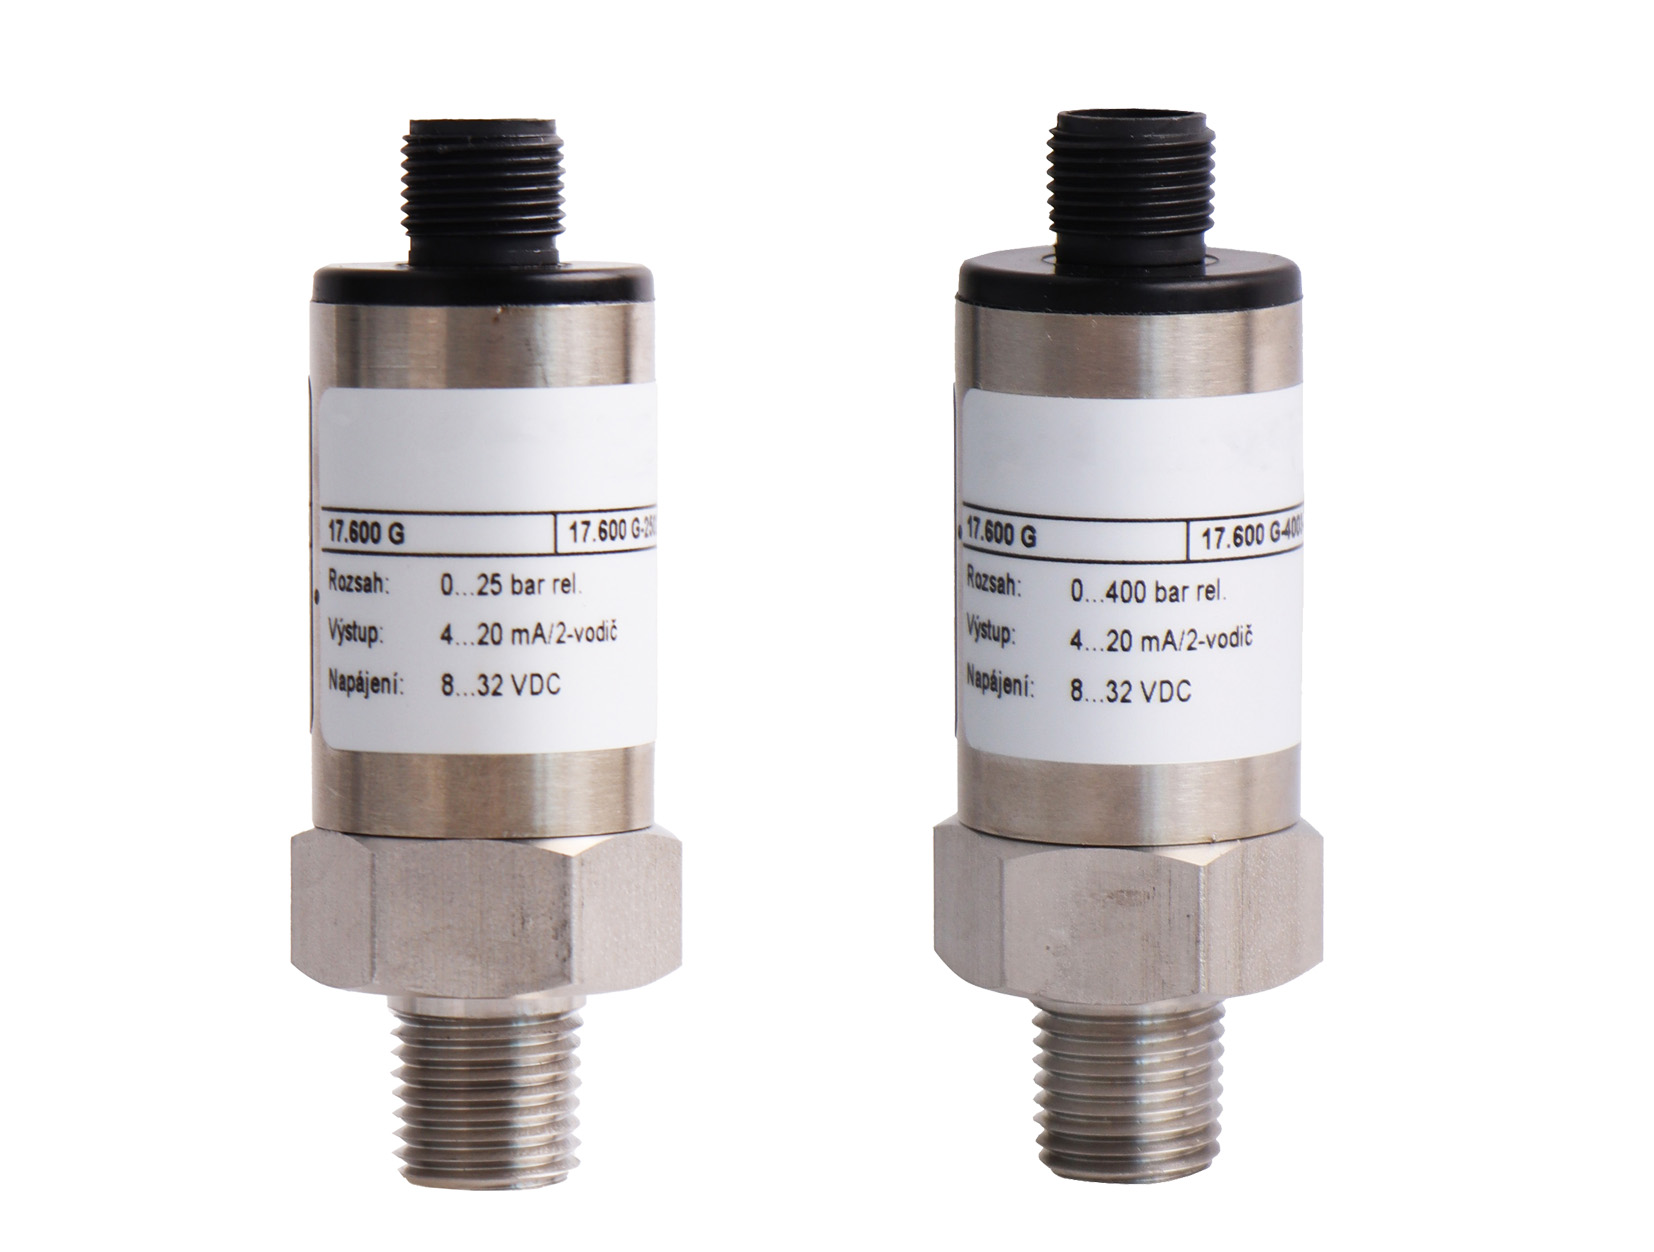 Pressure transmitters page image